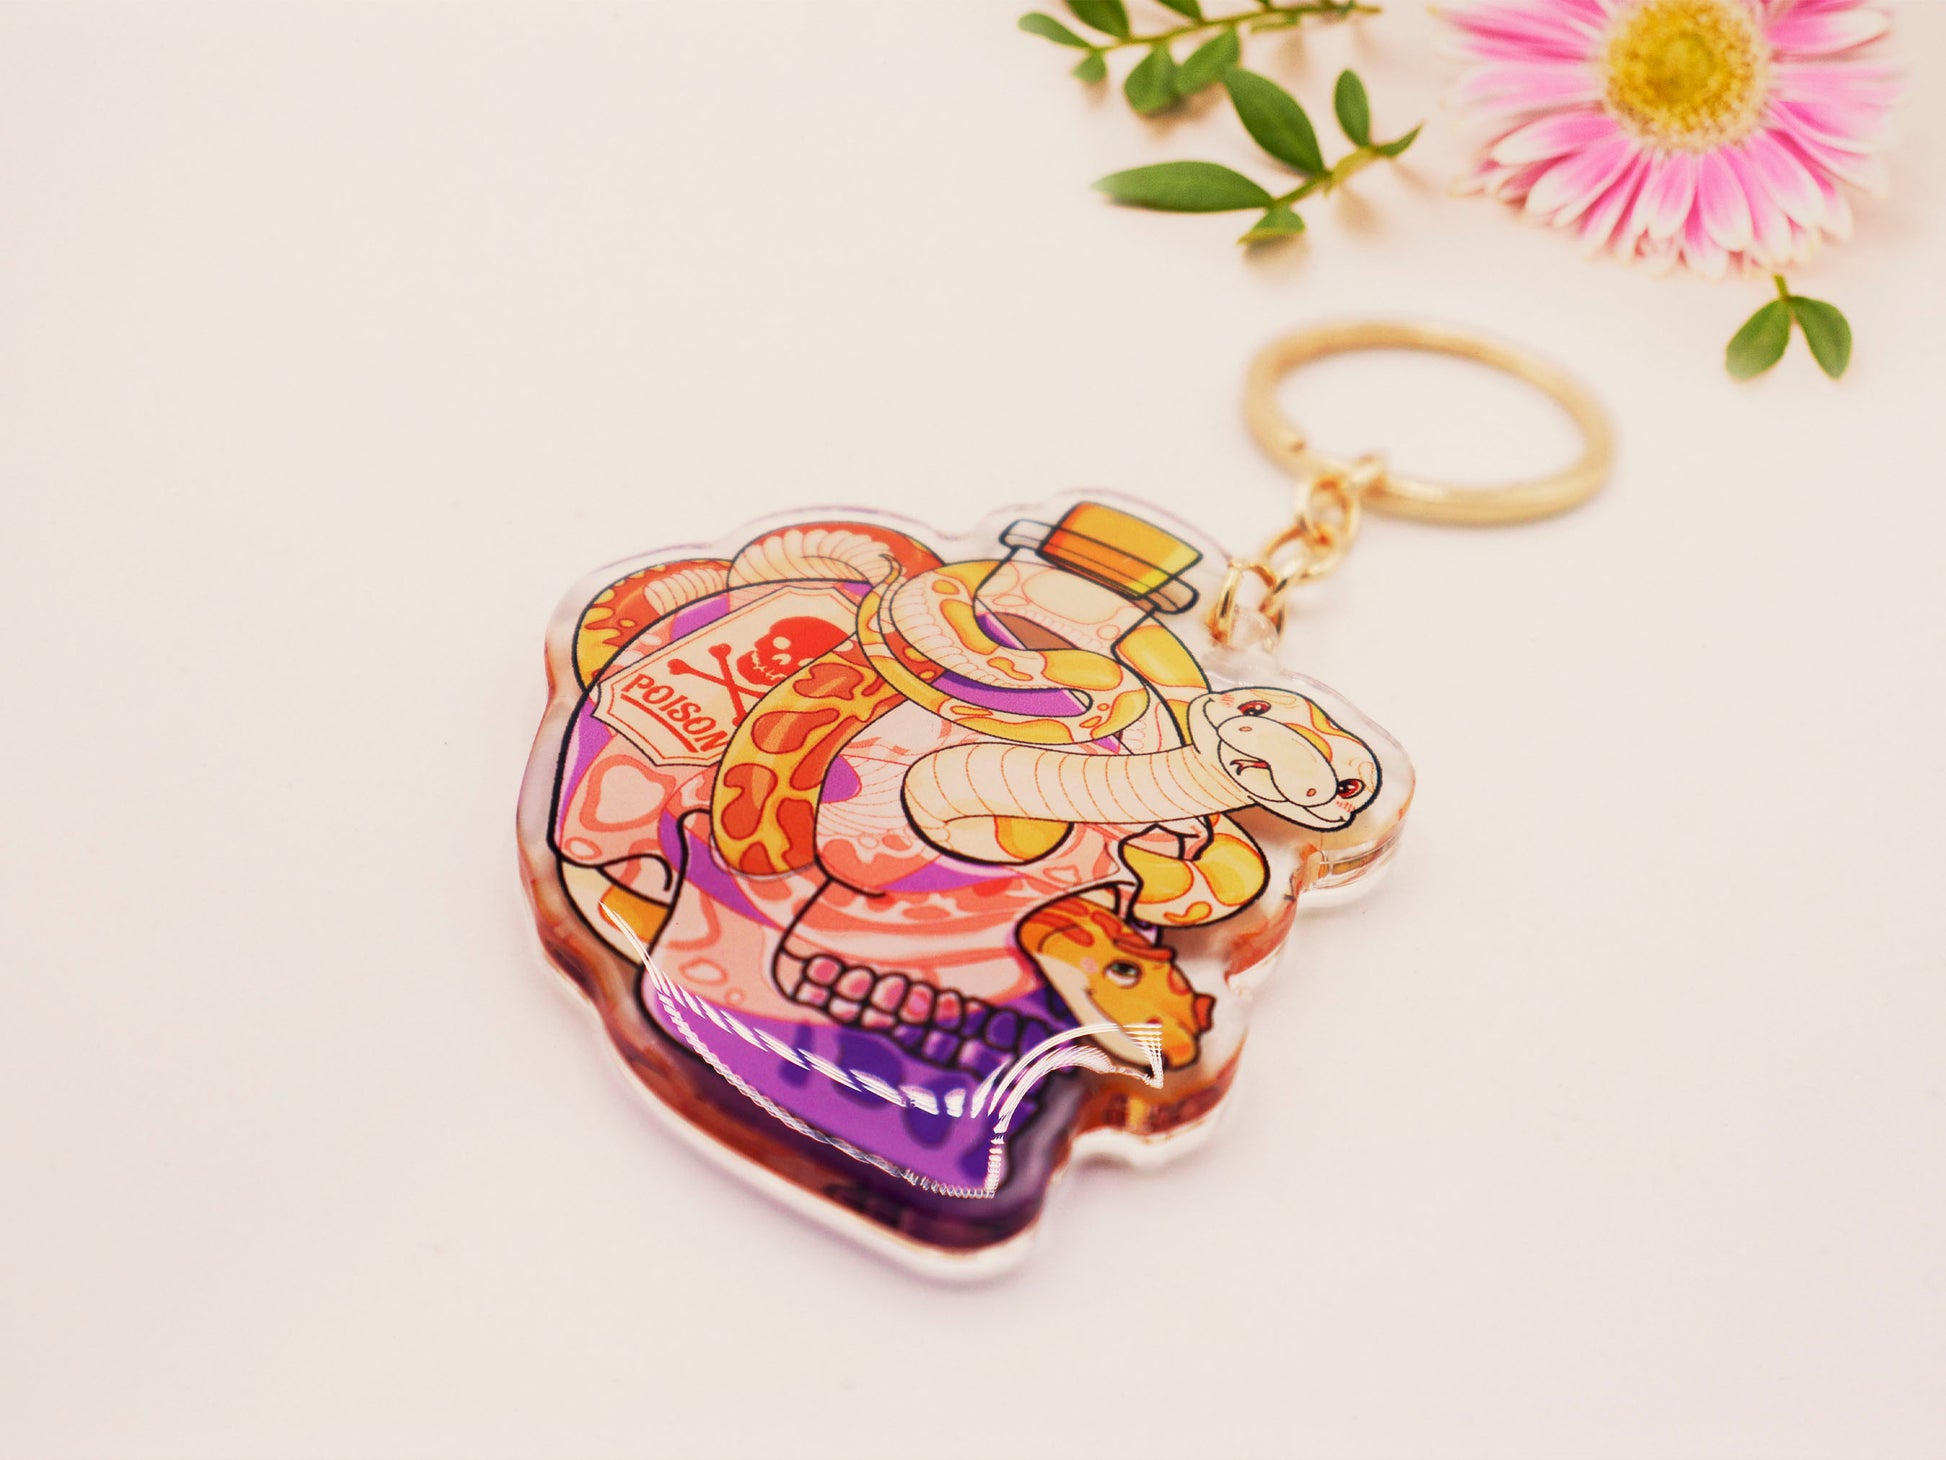 Clear acrylic double sided keyring with a cute cartoon illustrated skull shaped potion bottle with two yellow and brown corn snakes, filled with a purple liquid labelled with a skull and bones and the word poison.